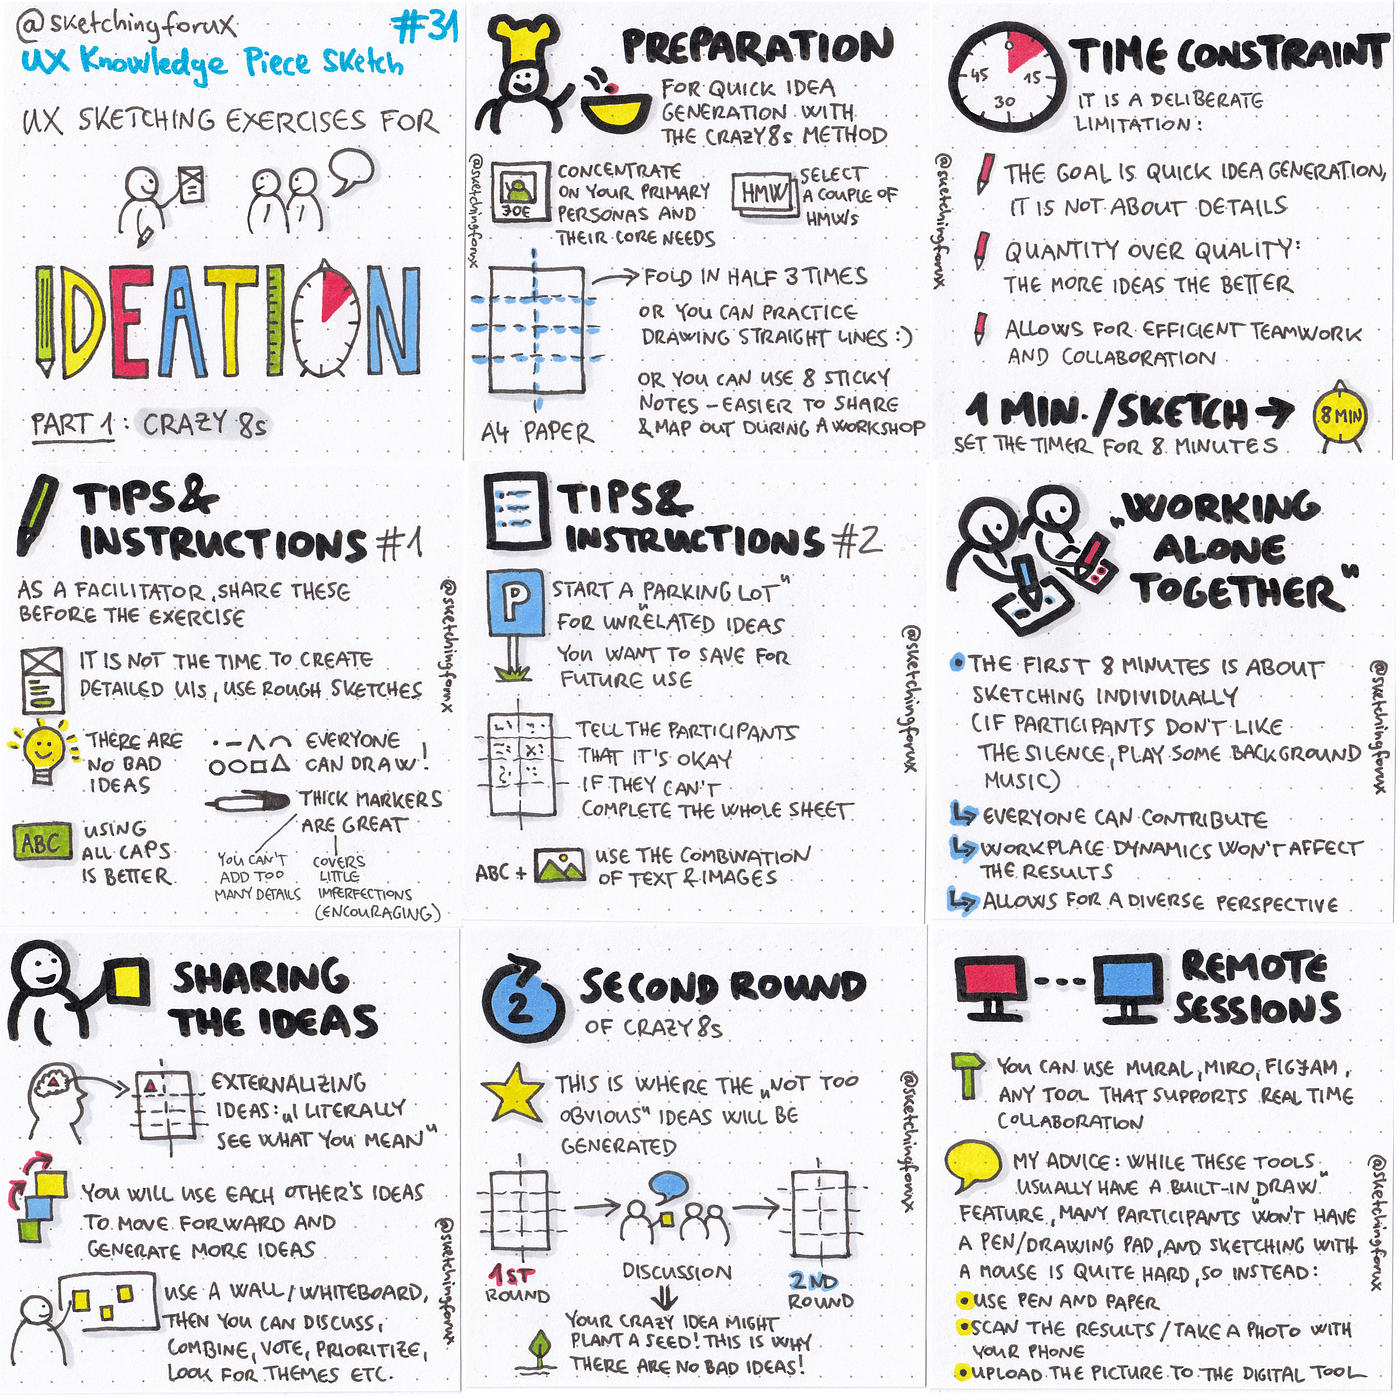 UX Sketching Exercises for Ideation Part 1: Crazy8s | by Krisztina Szerovay  | UX Knowledge Base Sketch